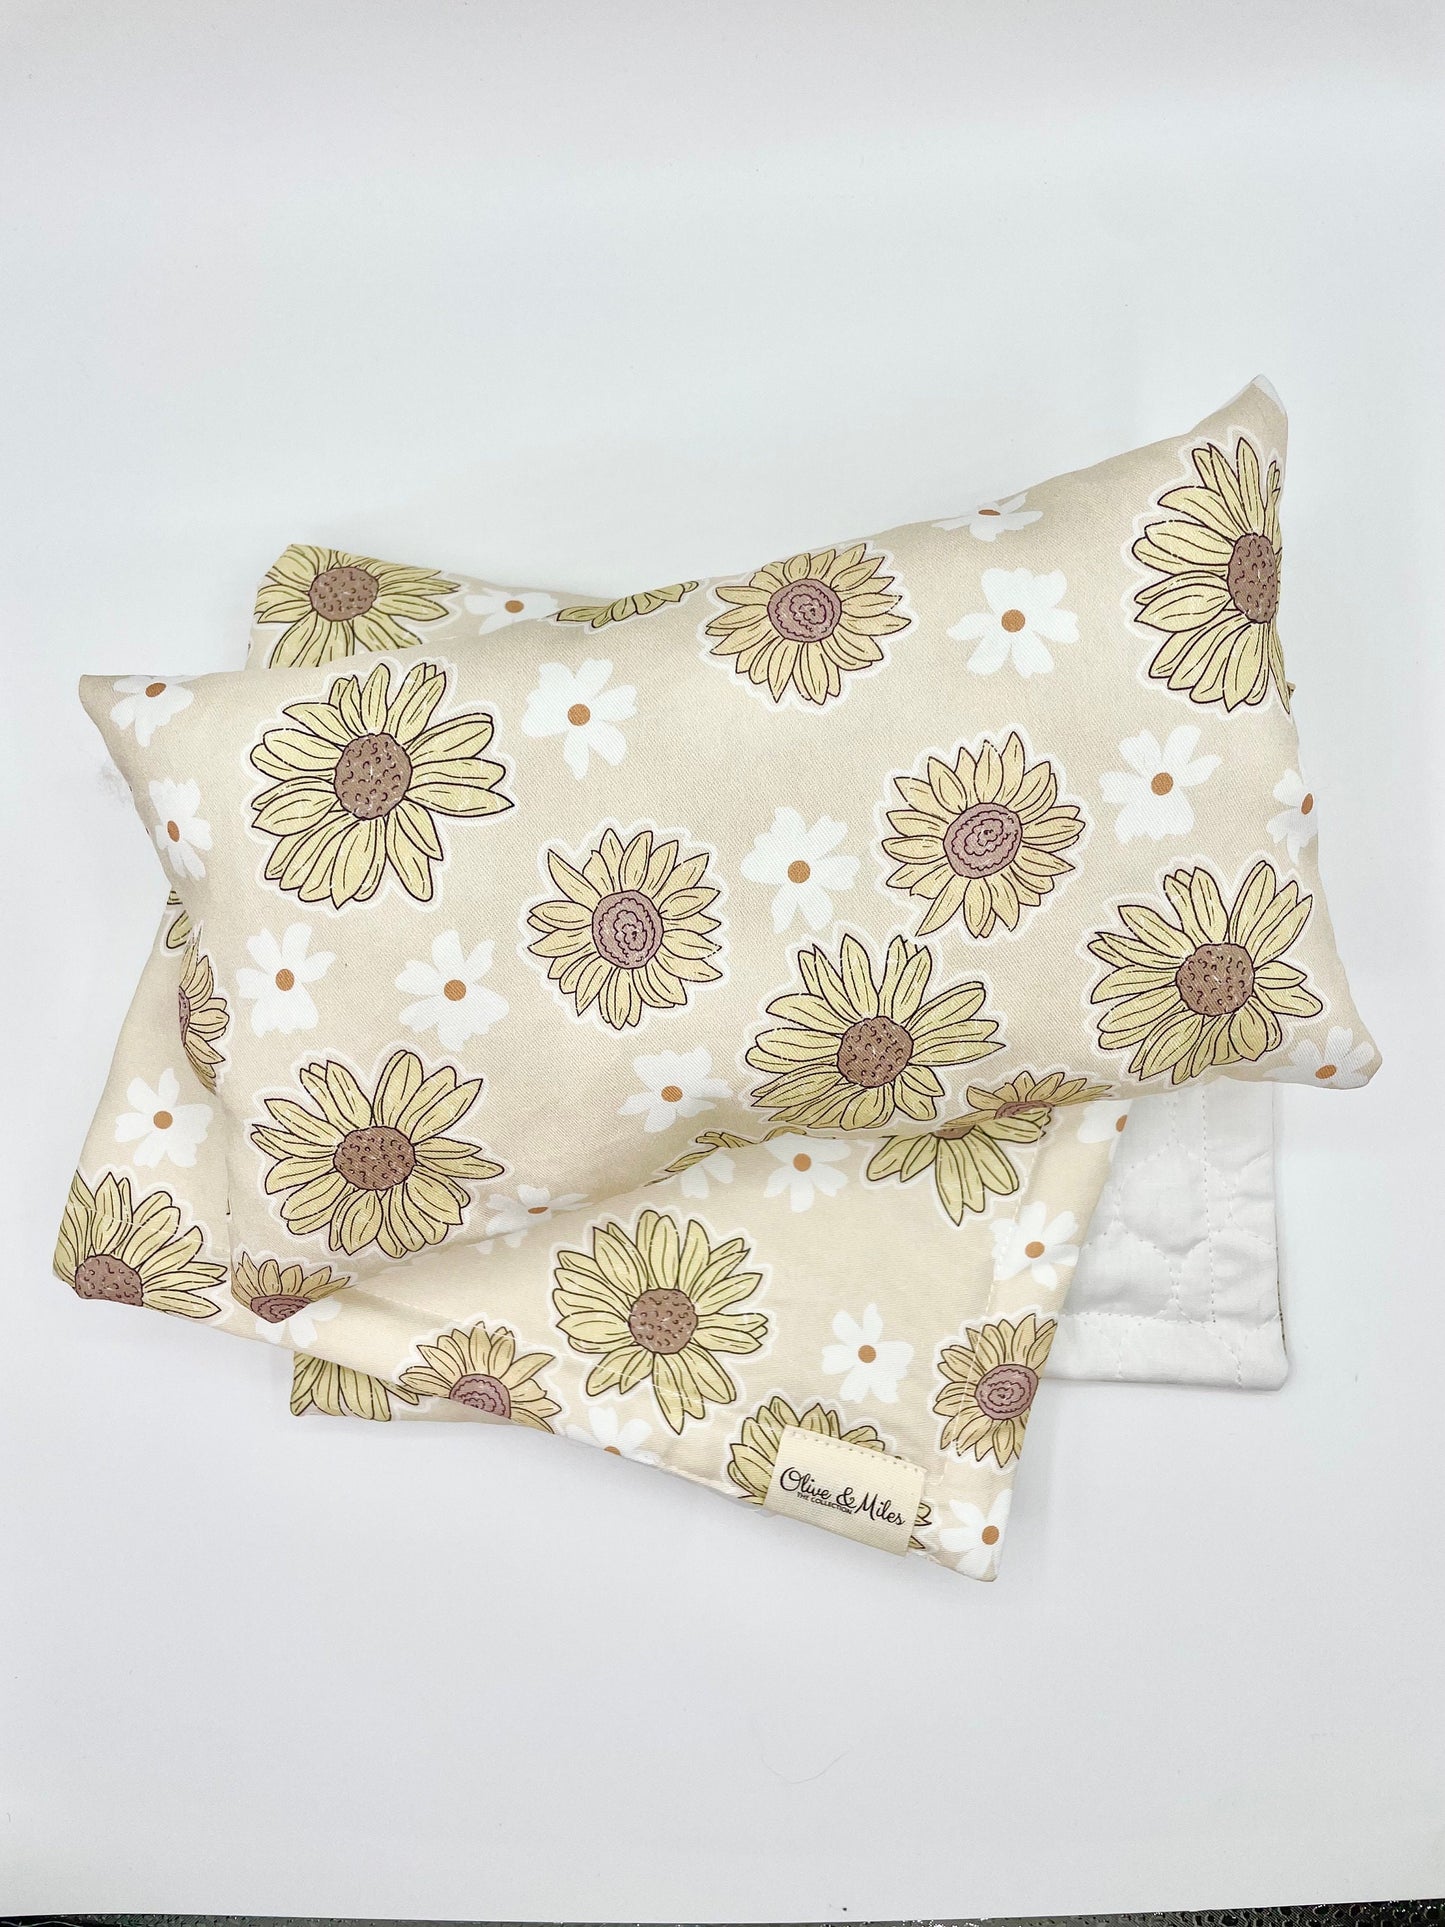 Sunflower Doll Bedding | Gift for niece | Crib sheet and pillow toy set | Doll Bed Cover Linen | Doll Cot Blanket | Crib Bedding Pram